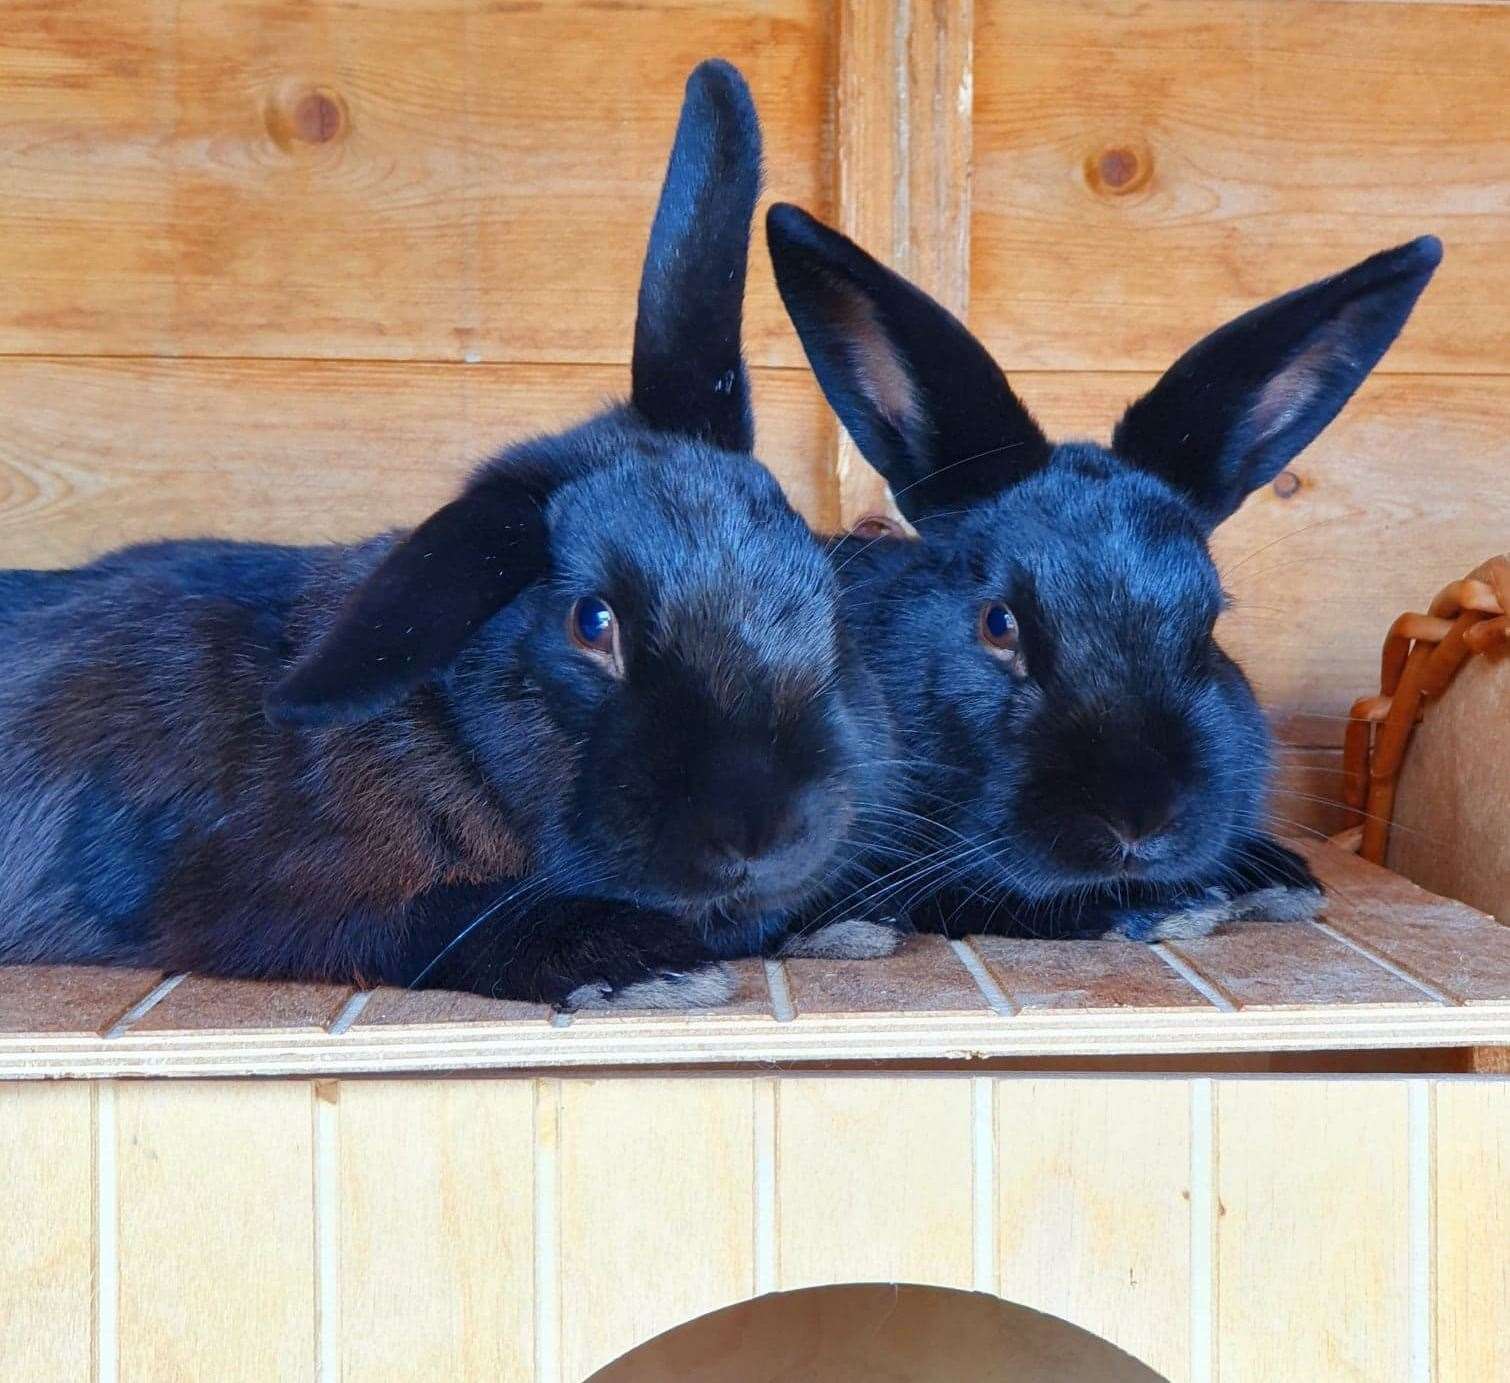 Rescue rabbits Sarah and Hector have been at the centre for six months waiting to be adopted